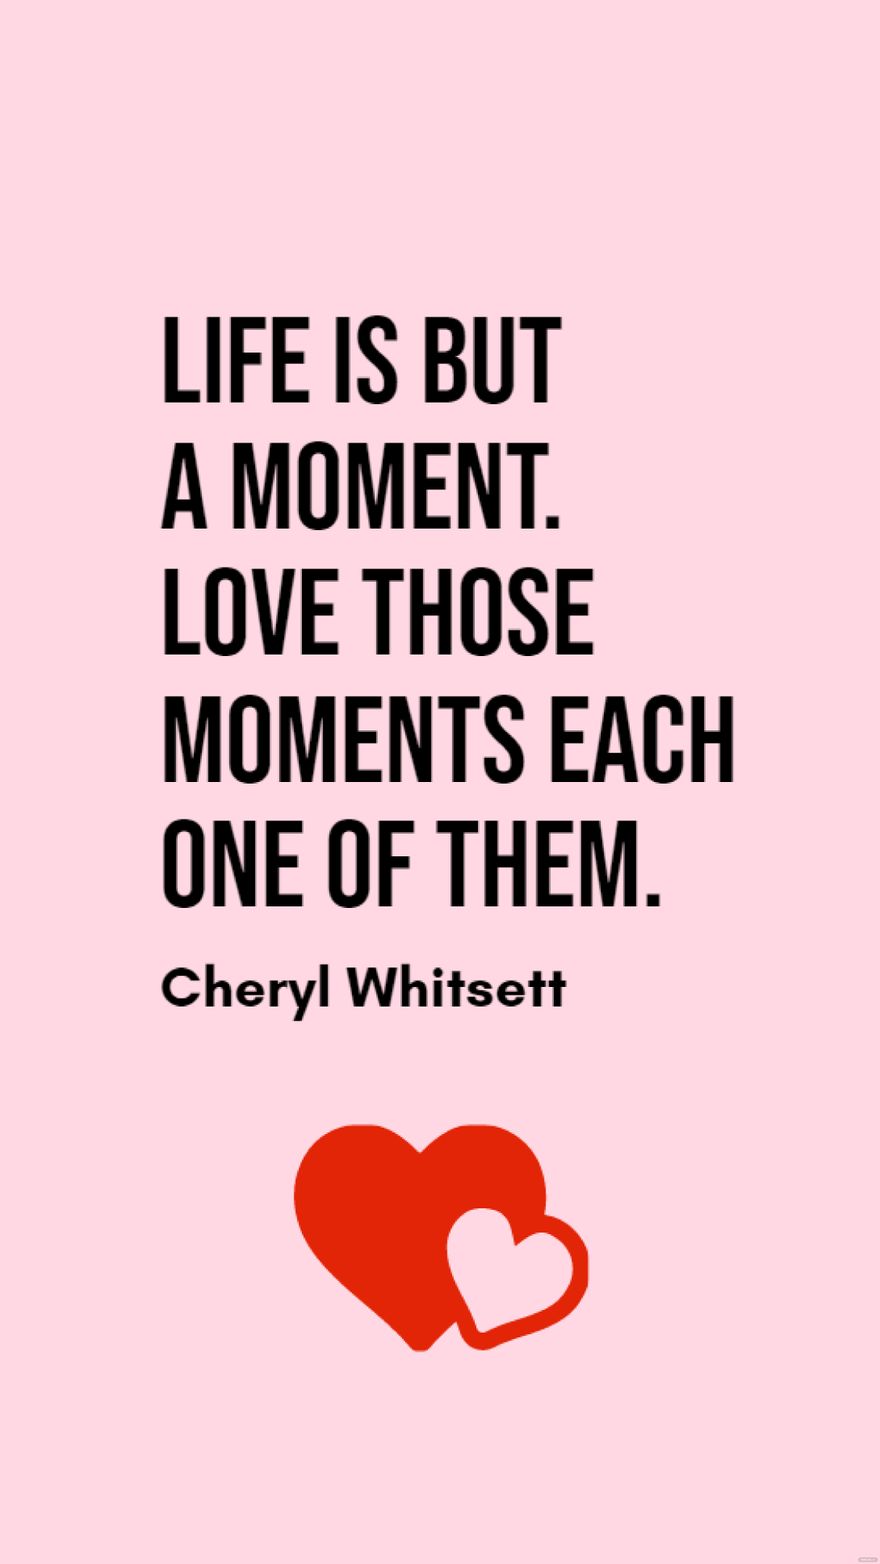 Cheryl Whitsett - Life is but a moment. Love those moments each one of them. in JPG